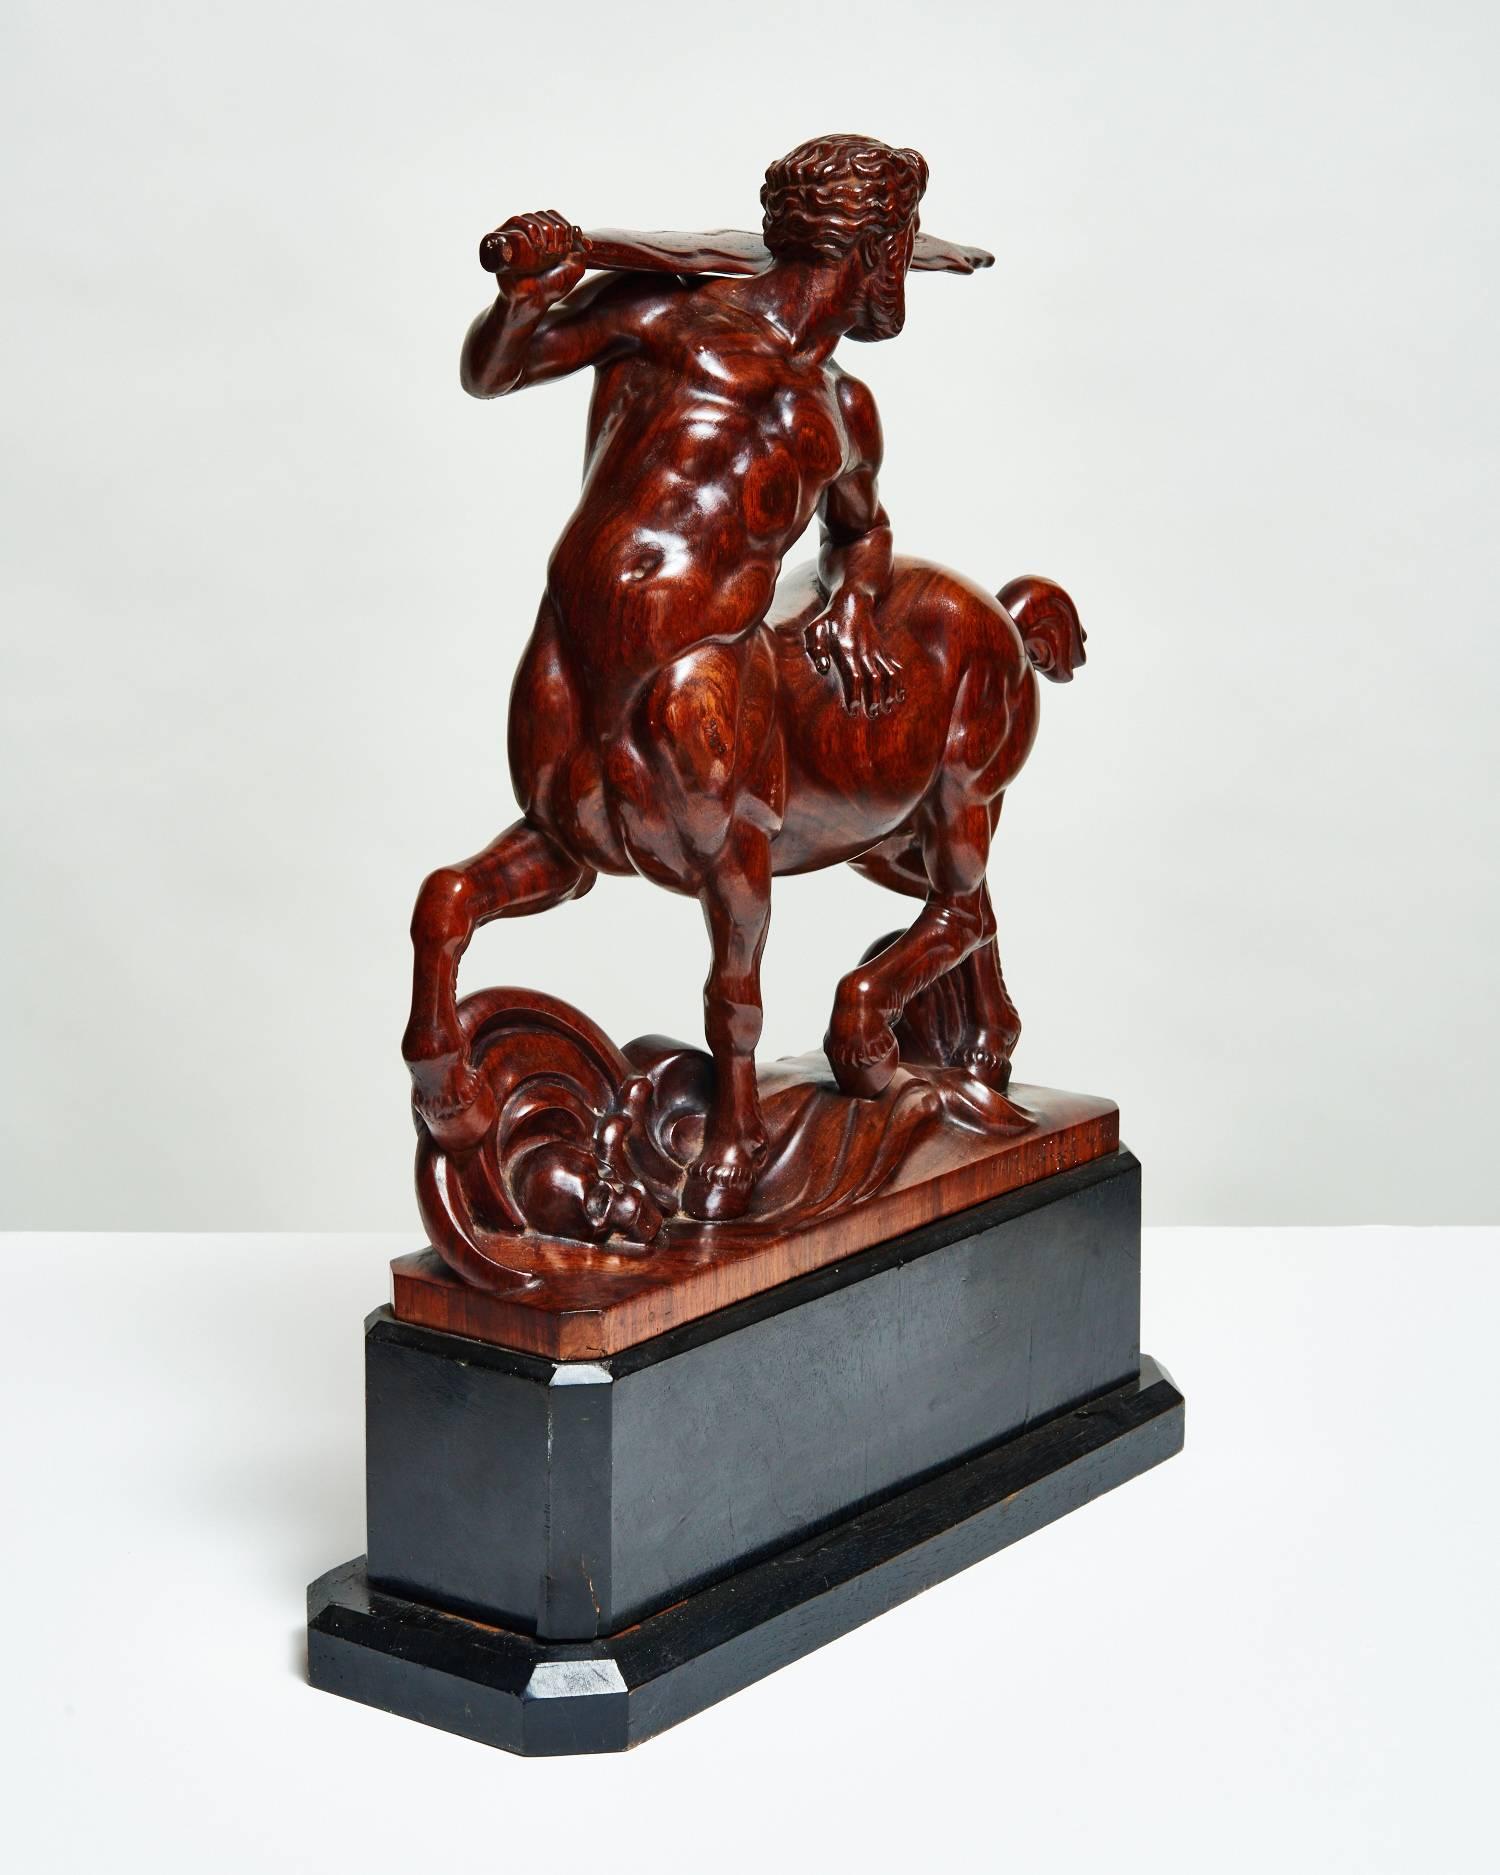 Carved from rich, warm maple wood and mounted on a large black stand with faceted edges, Hans Huggler-Wyss’ Maple Centaur sculpture is a powerful depiction of the half-man, half-horse mythological creature. The centaur carries a large spear that